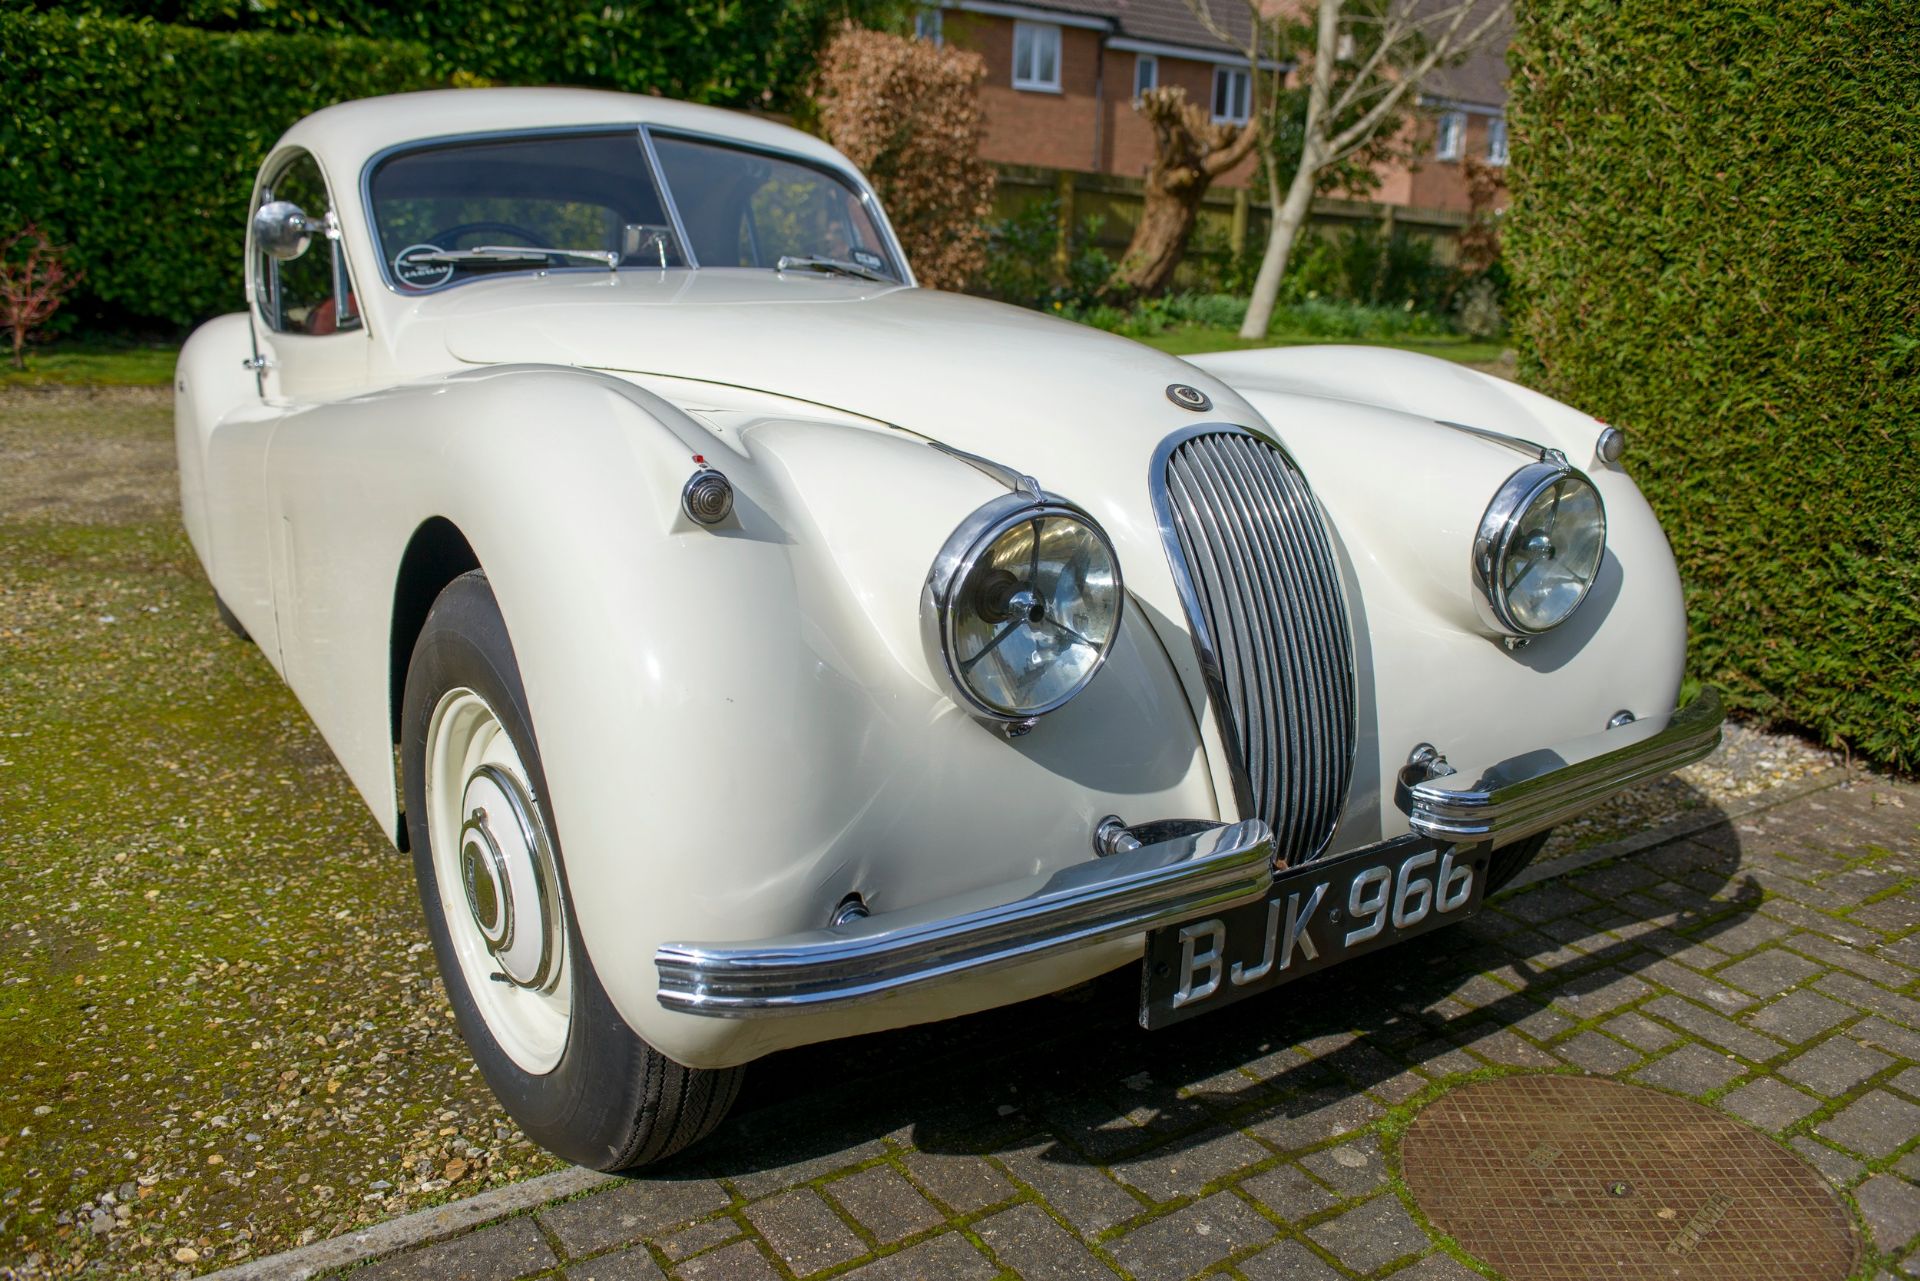 1954 JAGUAR XK120 FIXED HEAD COUPE Registration Number: BJK 966 Chassis Number: 669158 Recorded - Image 4 of 61